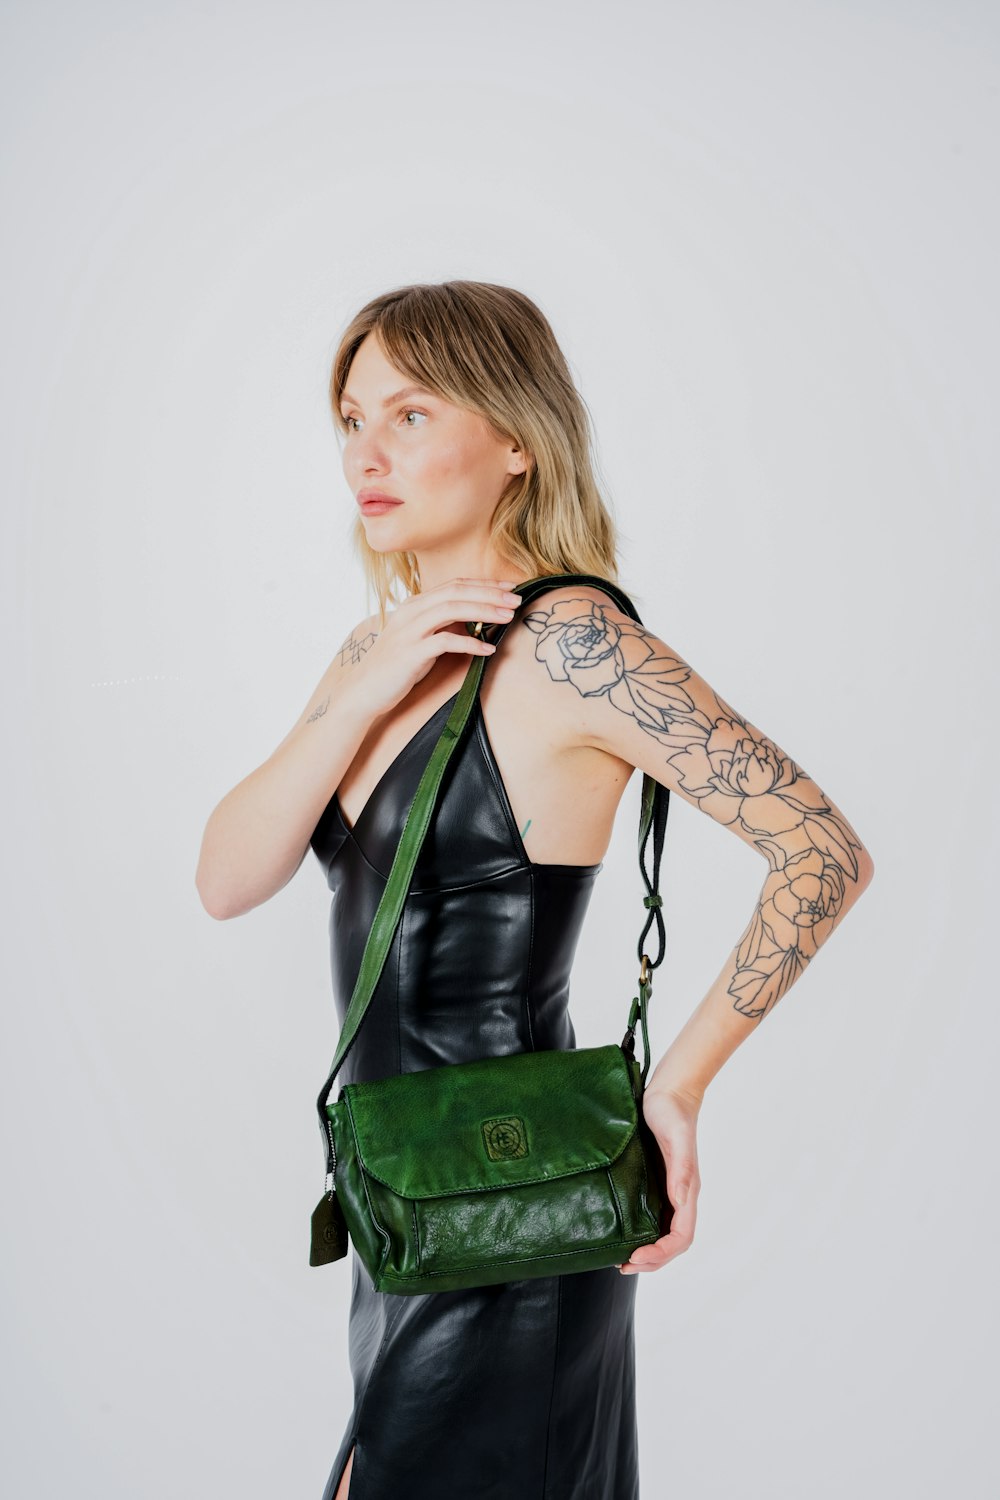 a woman in a black leather dress holding a green bag